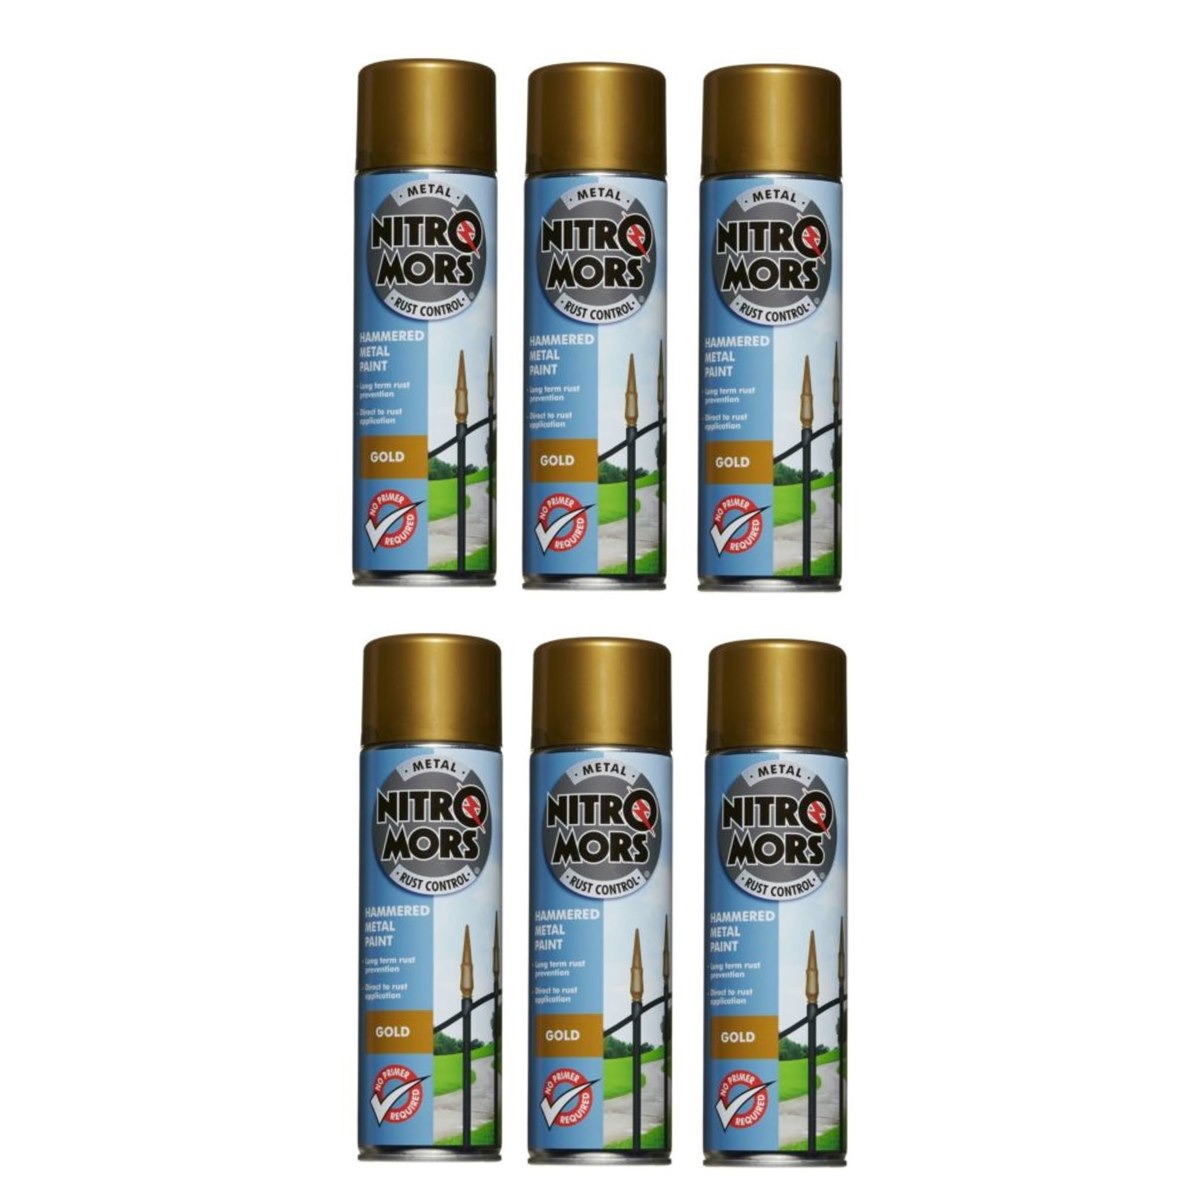 Case of 6 x NitroMors Hammered Metal Paint 500ml Gold